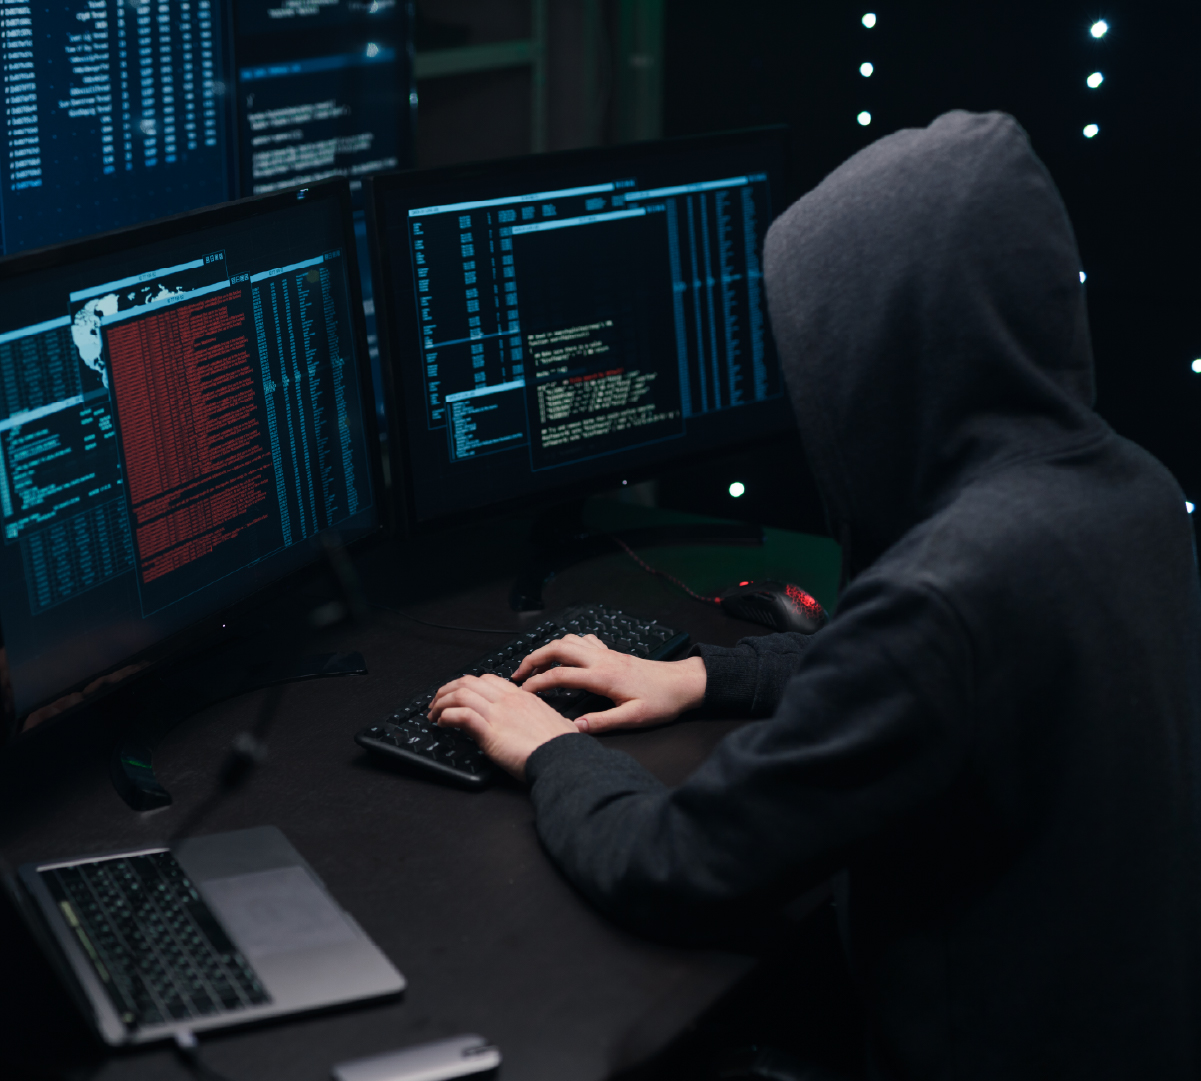 Hooded hacker in front of computer screens